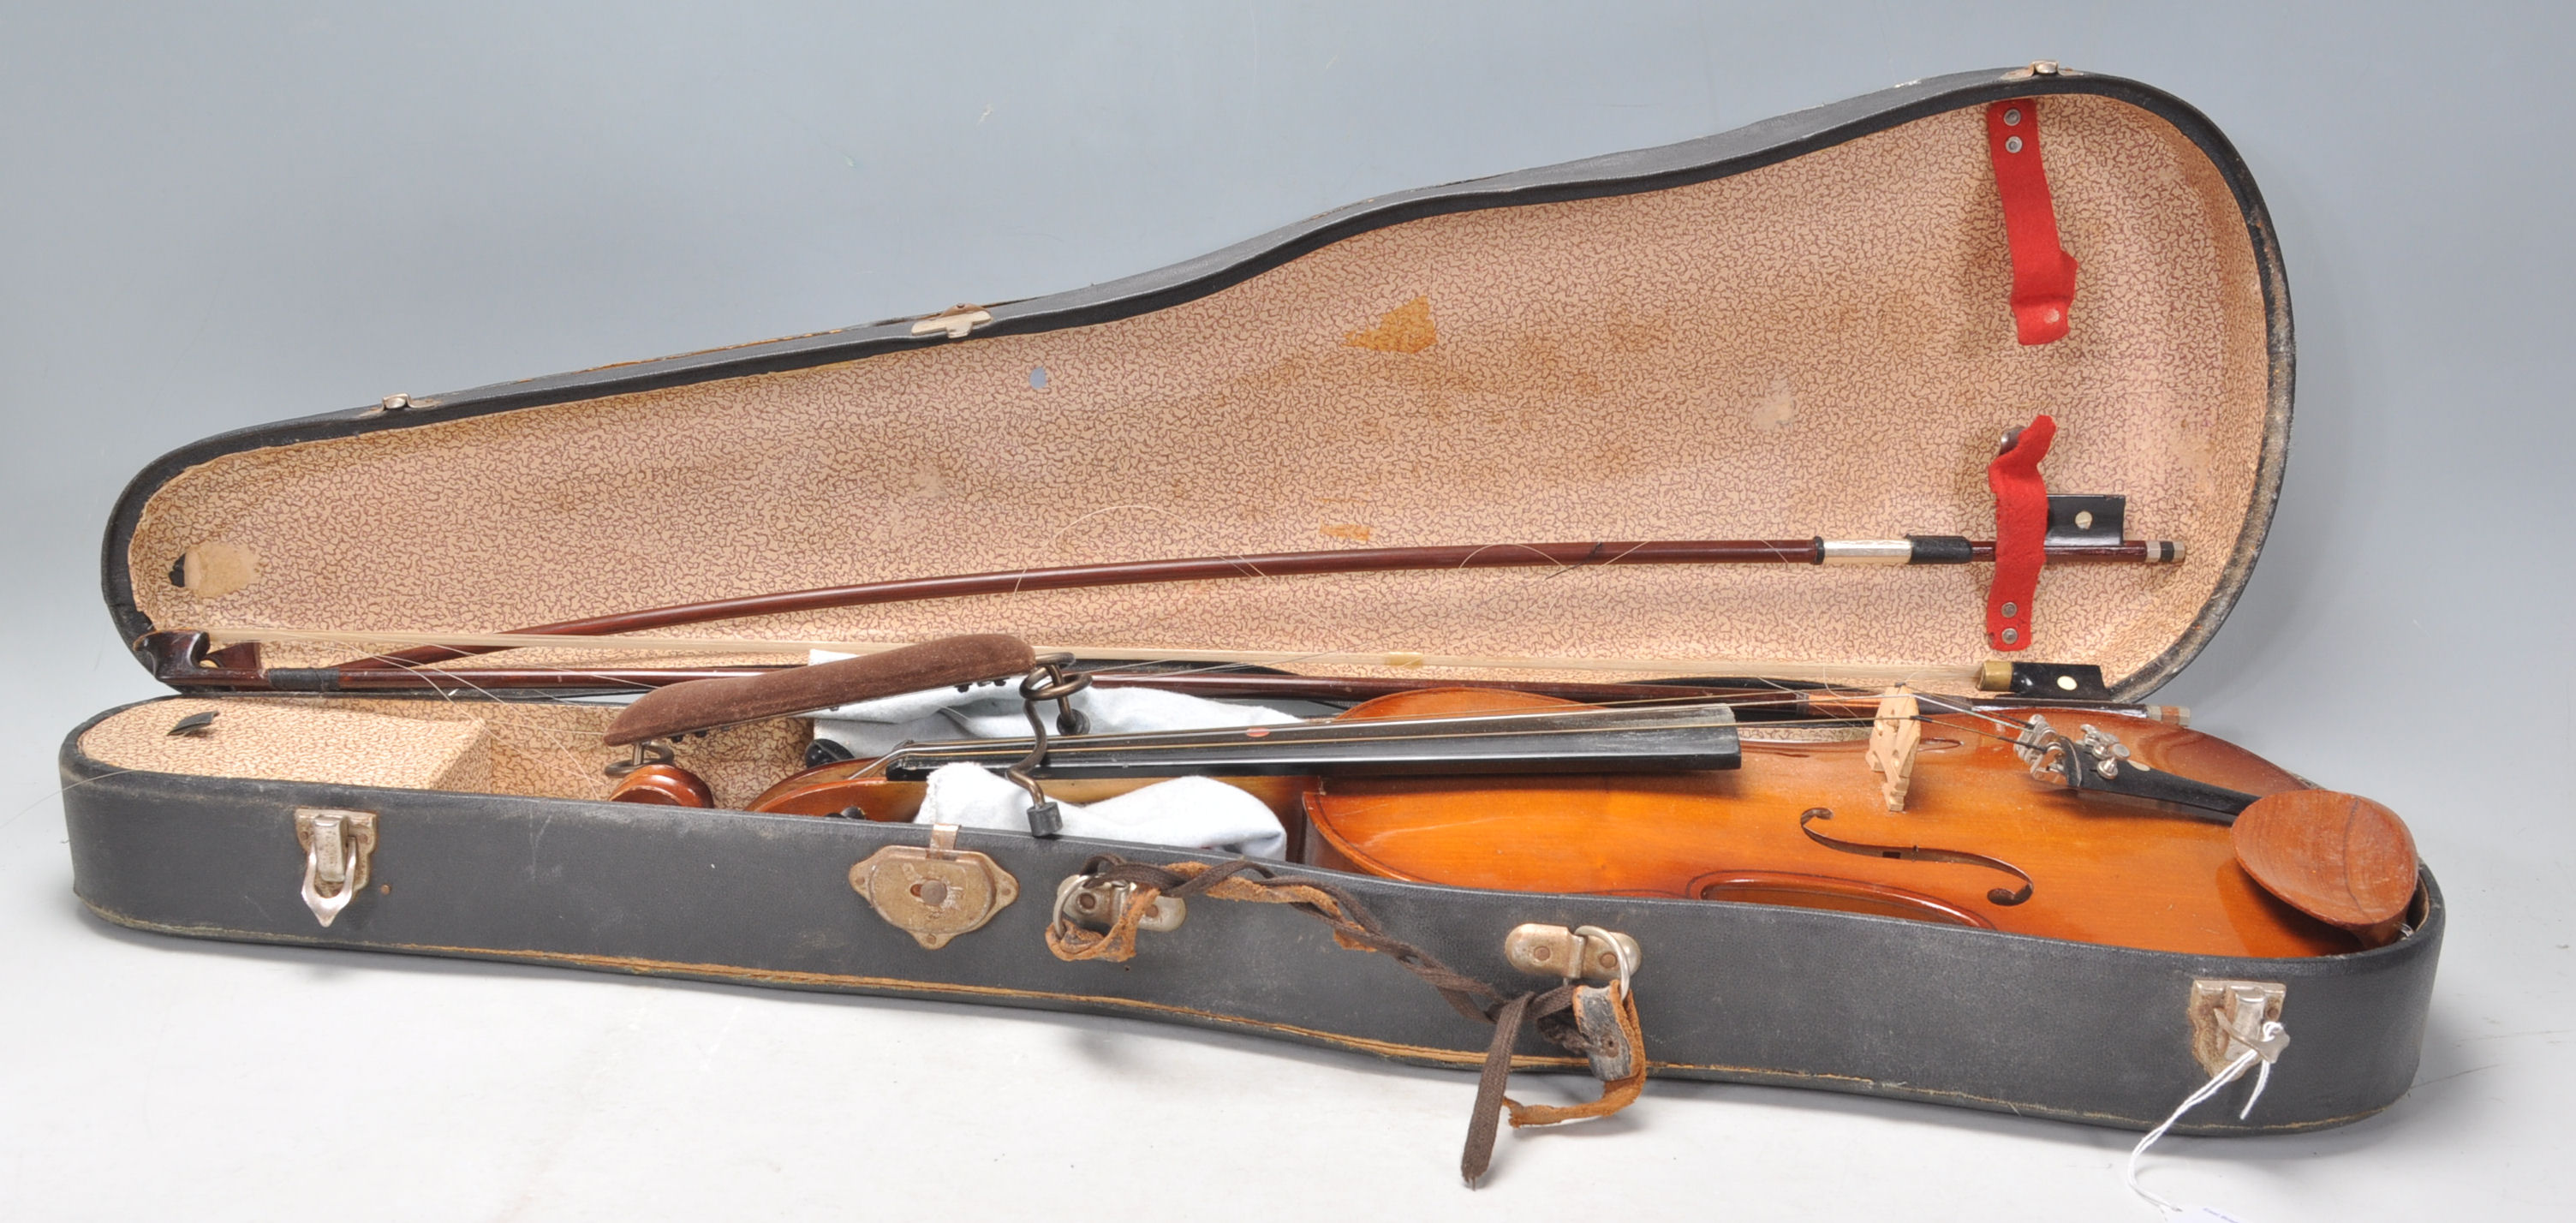 A 20th Century full size violin with two piece bac